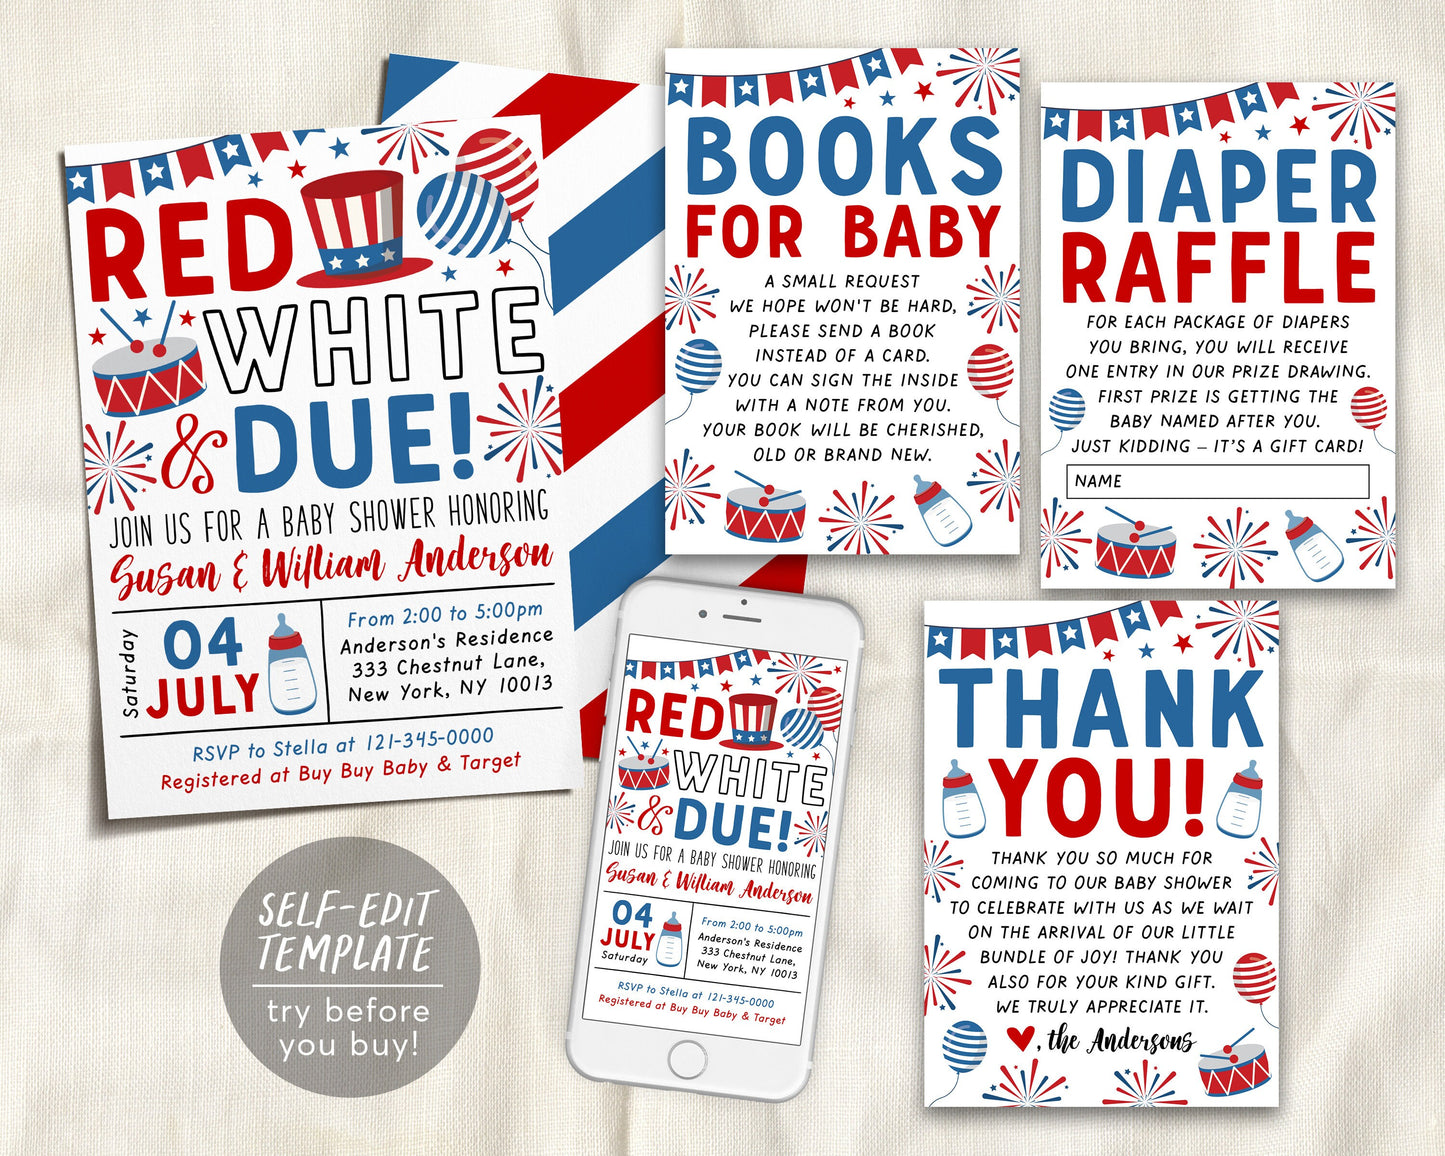 4th of July Gender Reveal Party BUNDLE Suite Set Editable Template, Red White and Due Baby Shower Invitation, Book Request Diaper Raffle